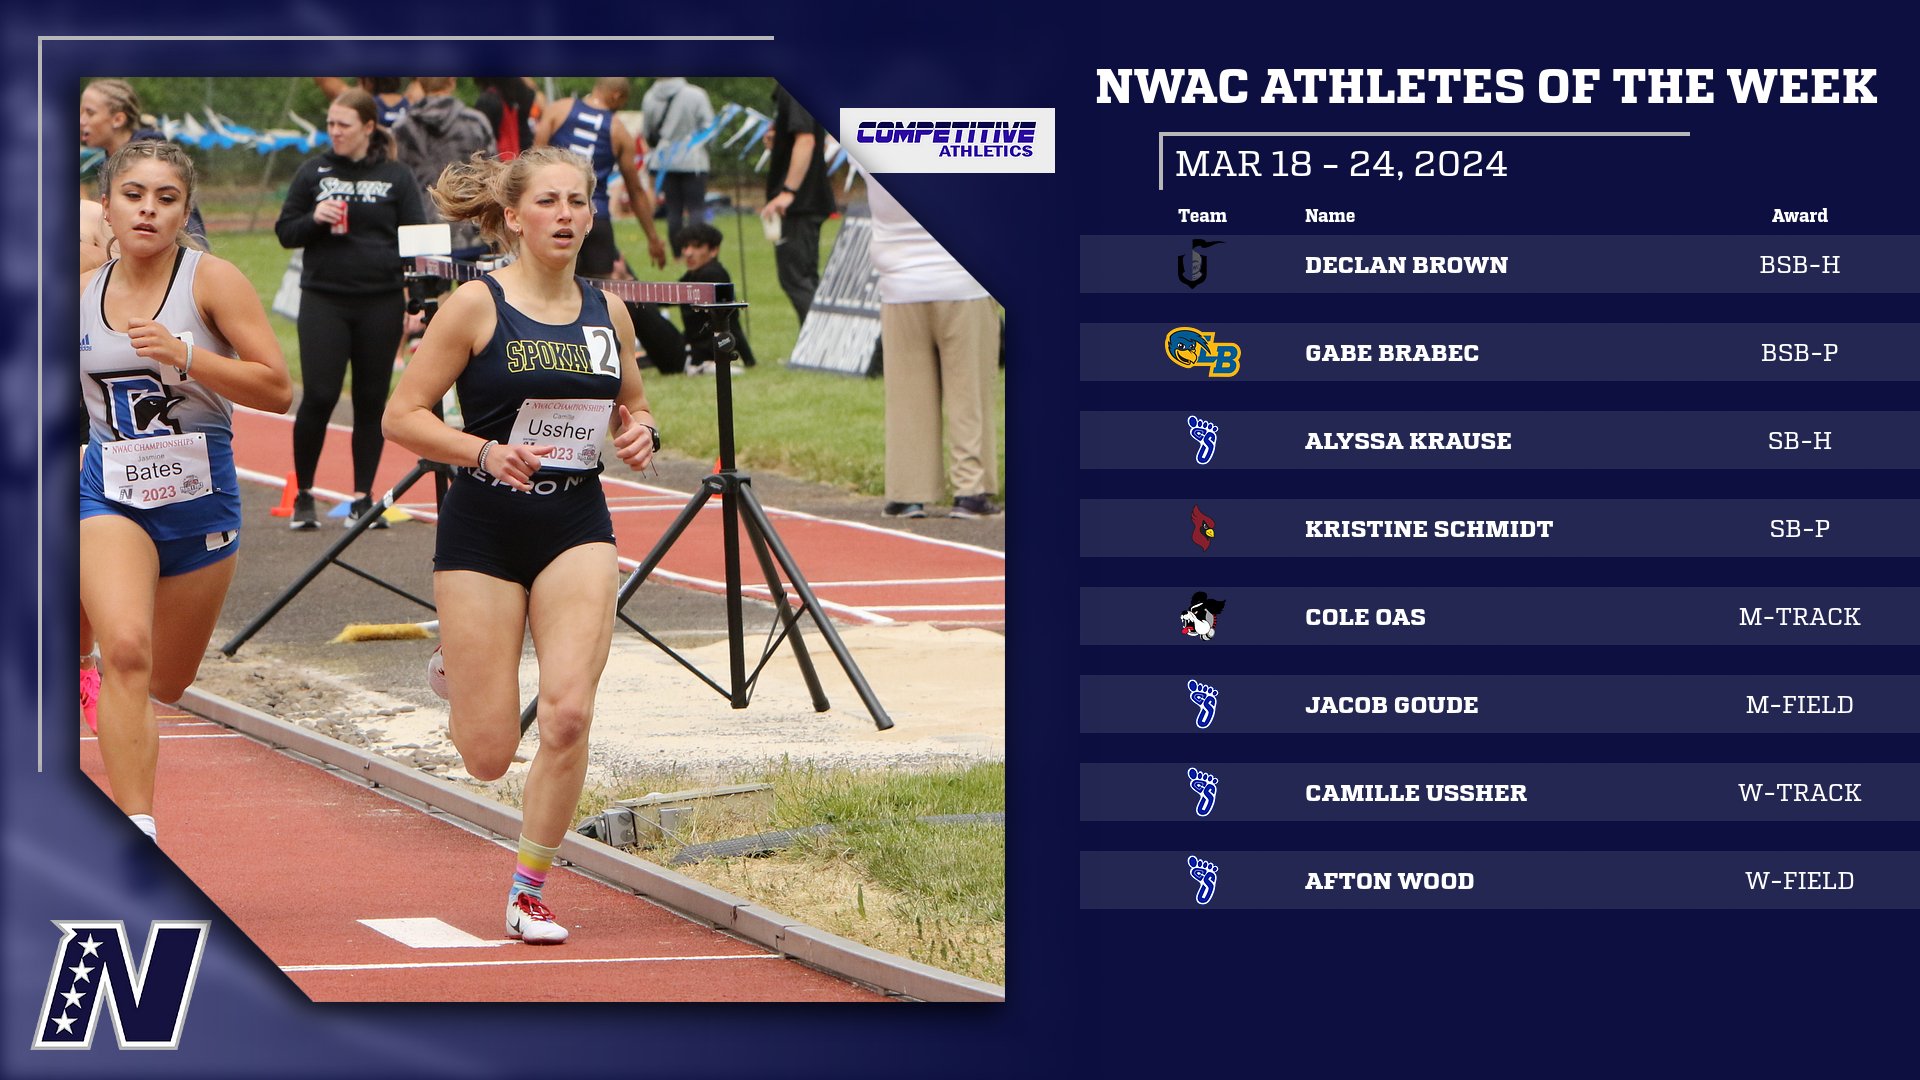 Competitive Athletics NWAC Athletes of the Week: March 18-24